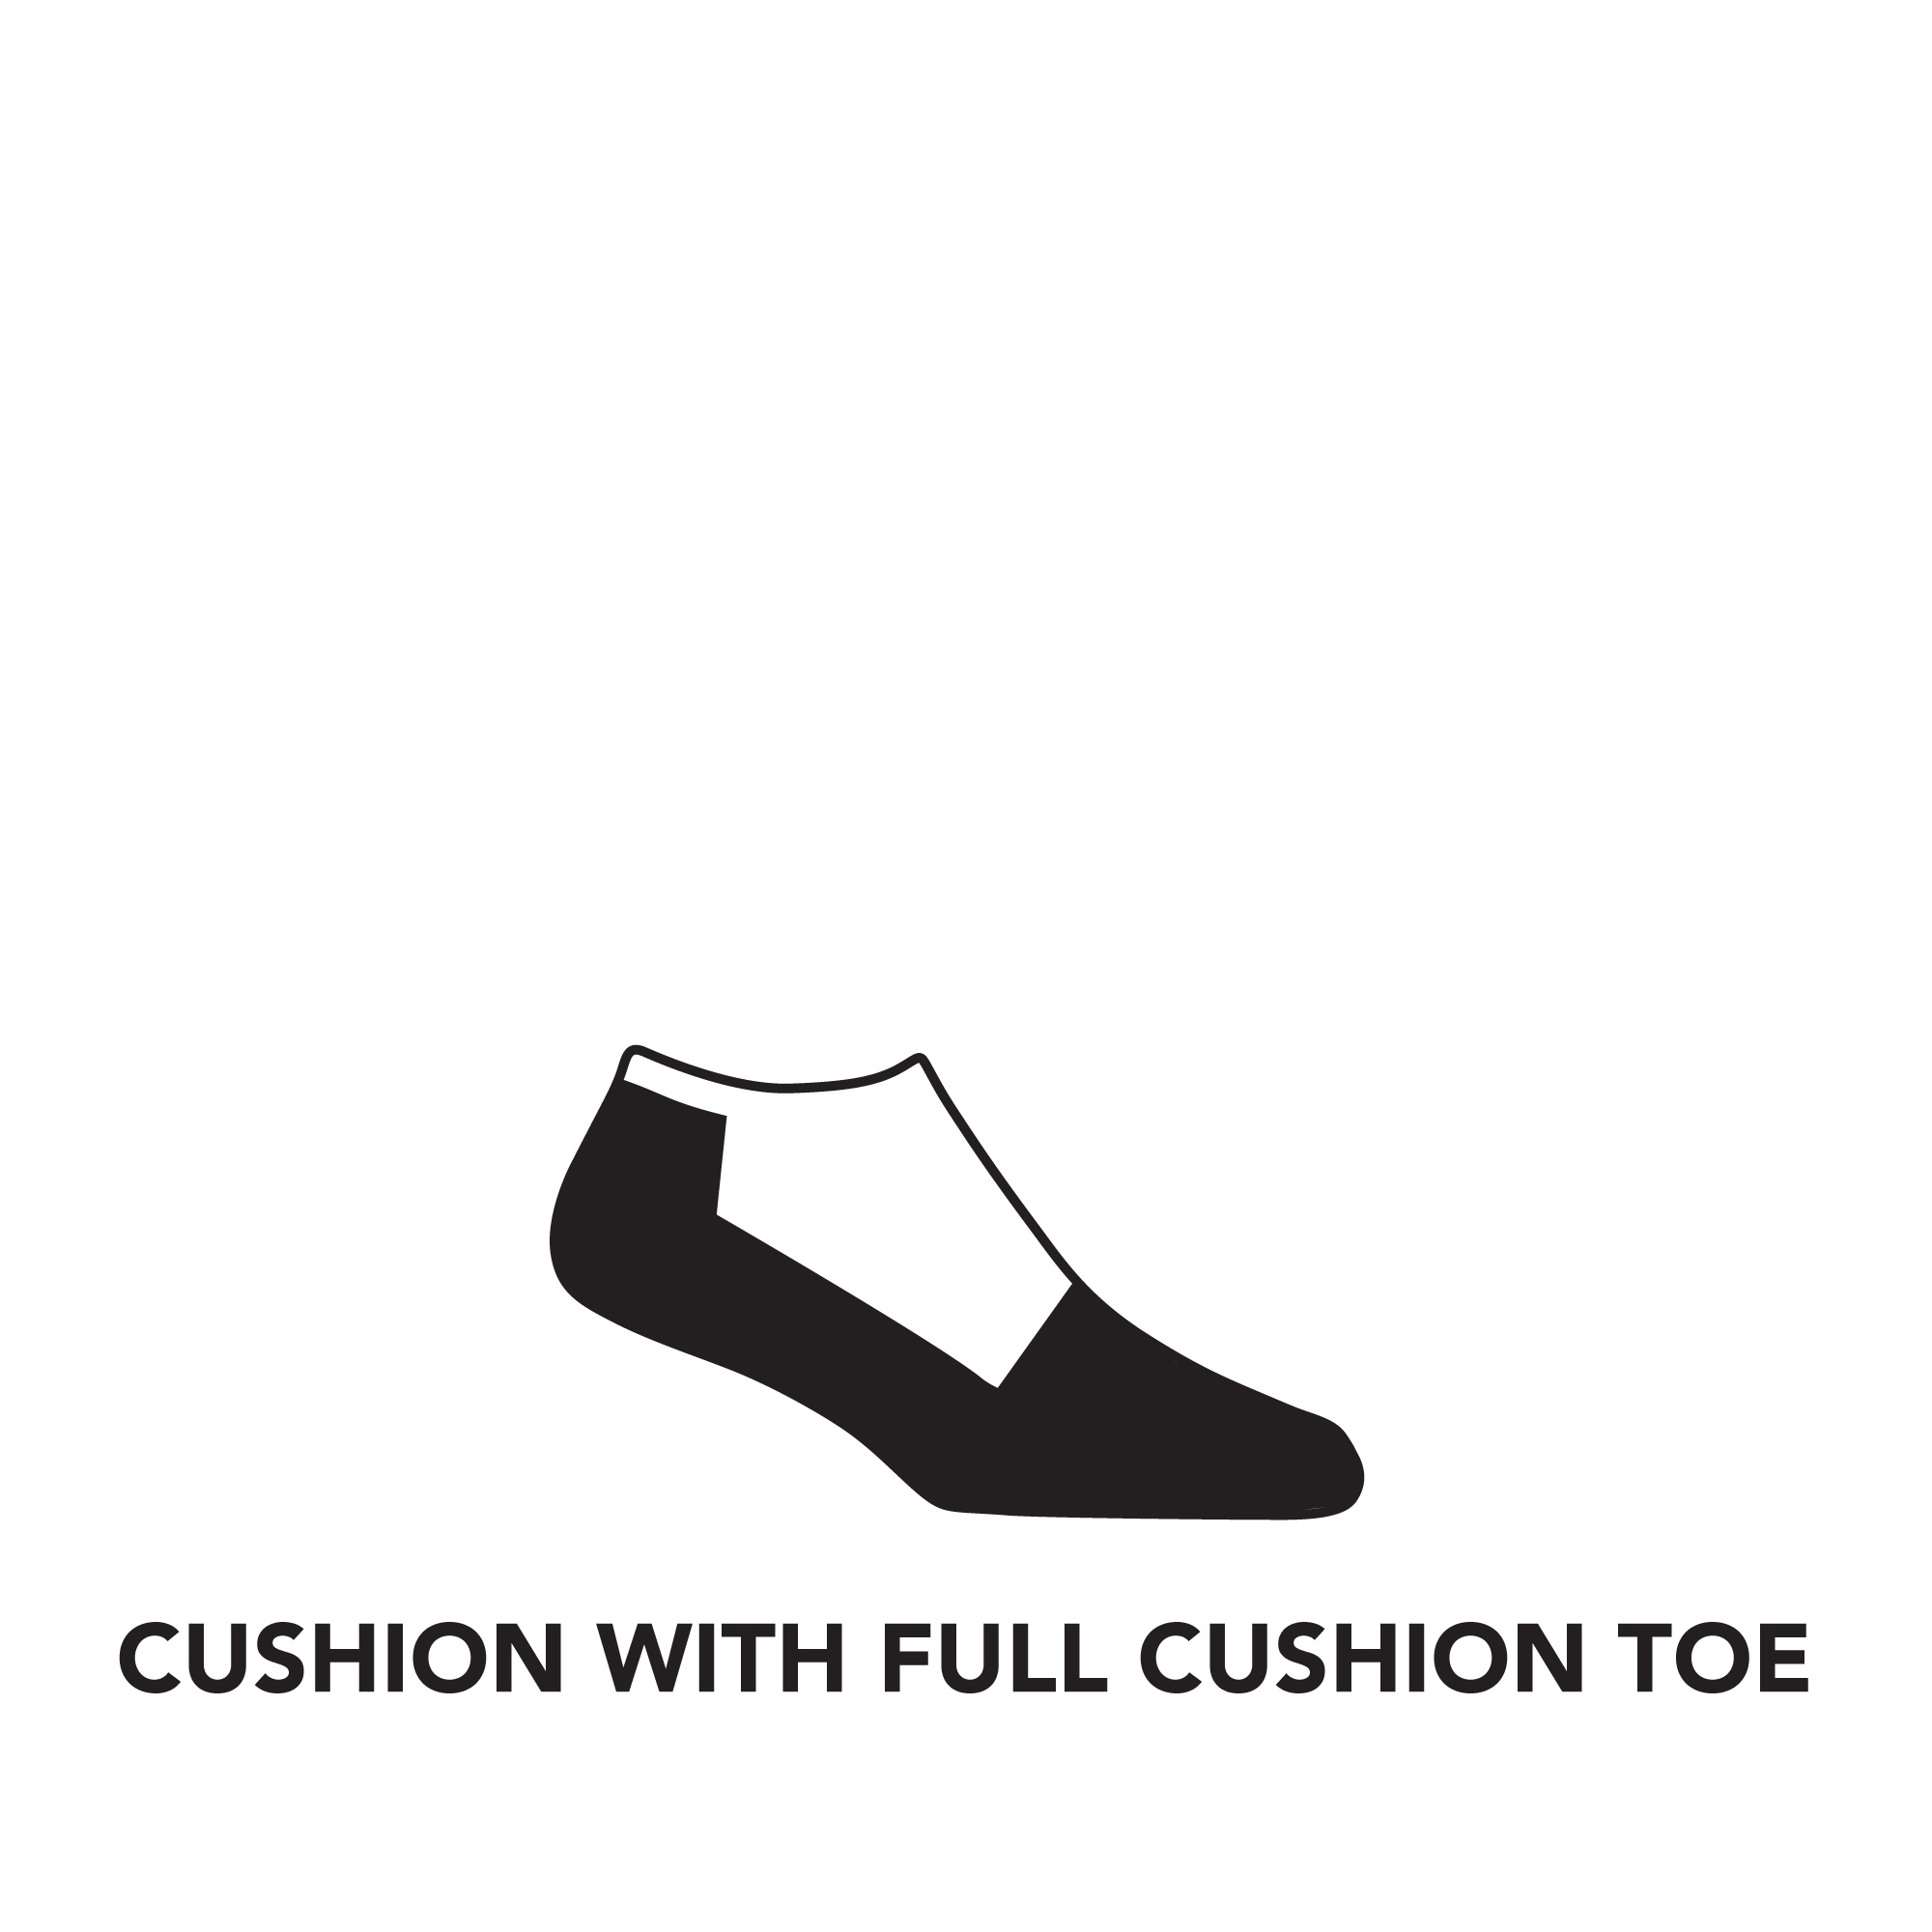 Cushion profile image outlining the cushion extended over the toe underfoot and up the heel